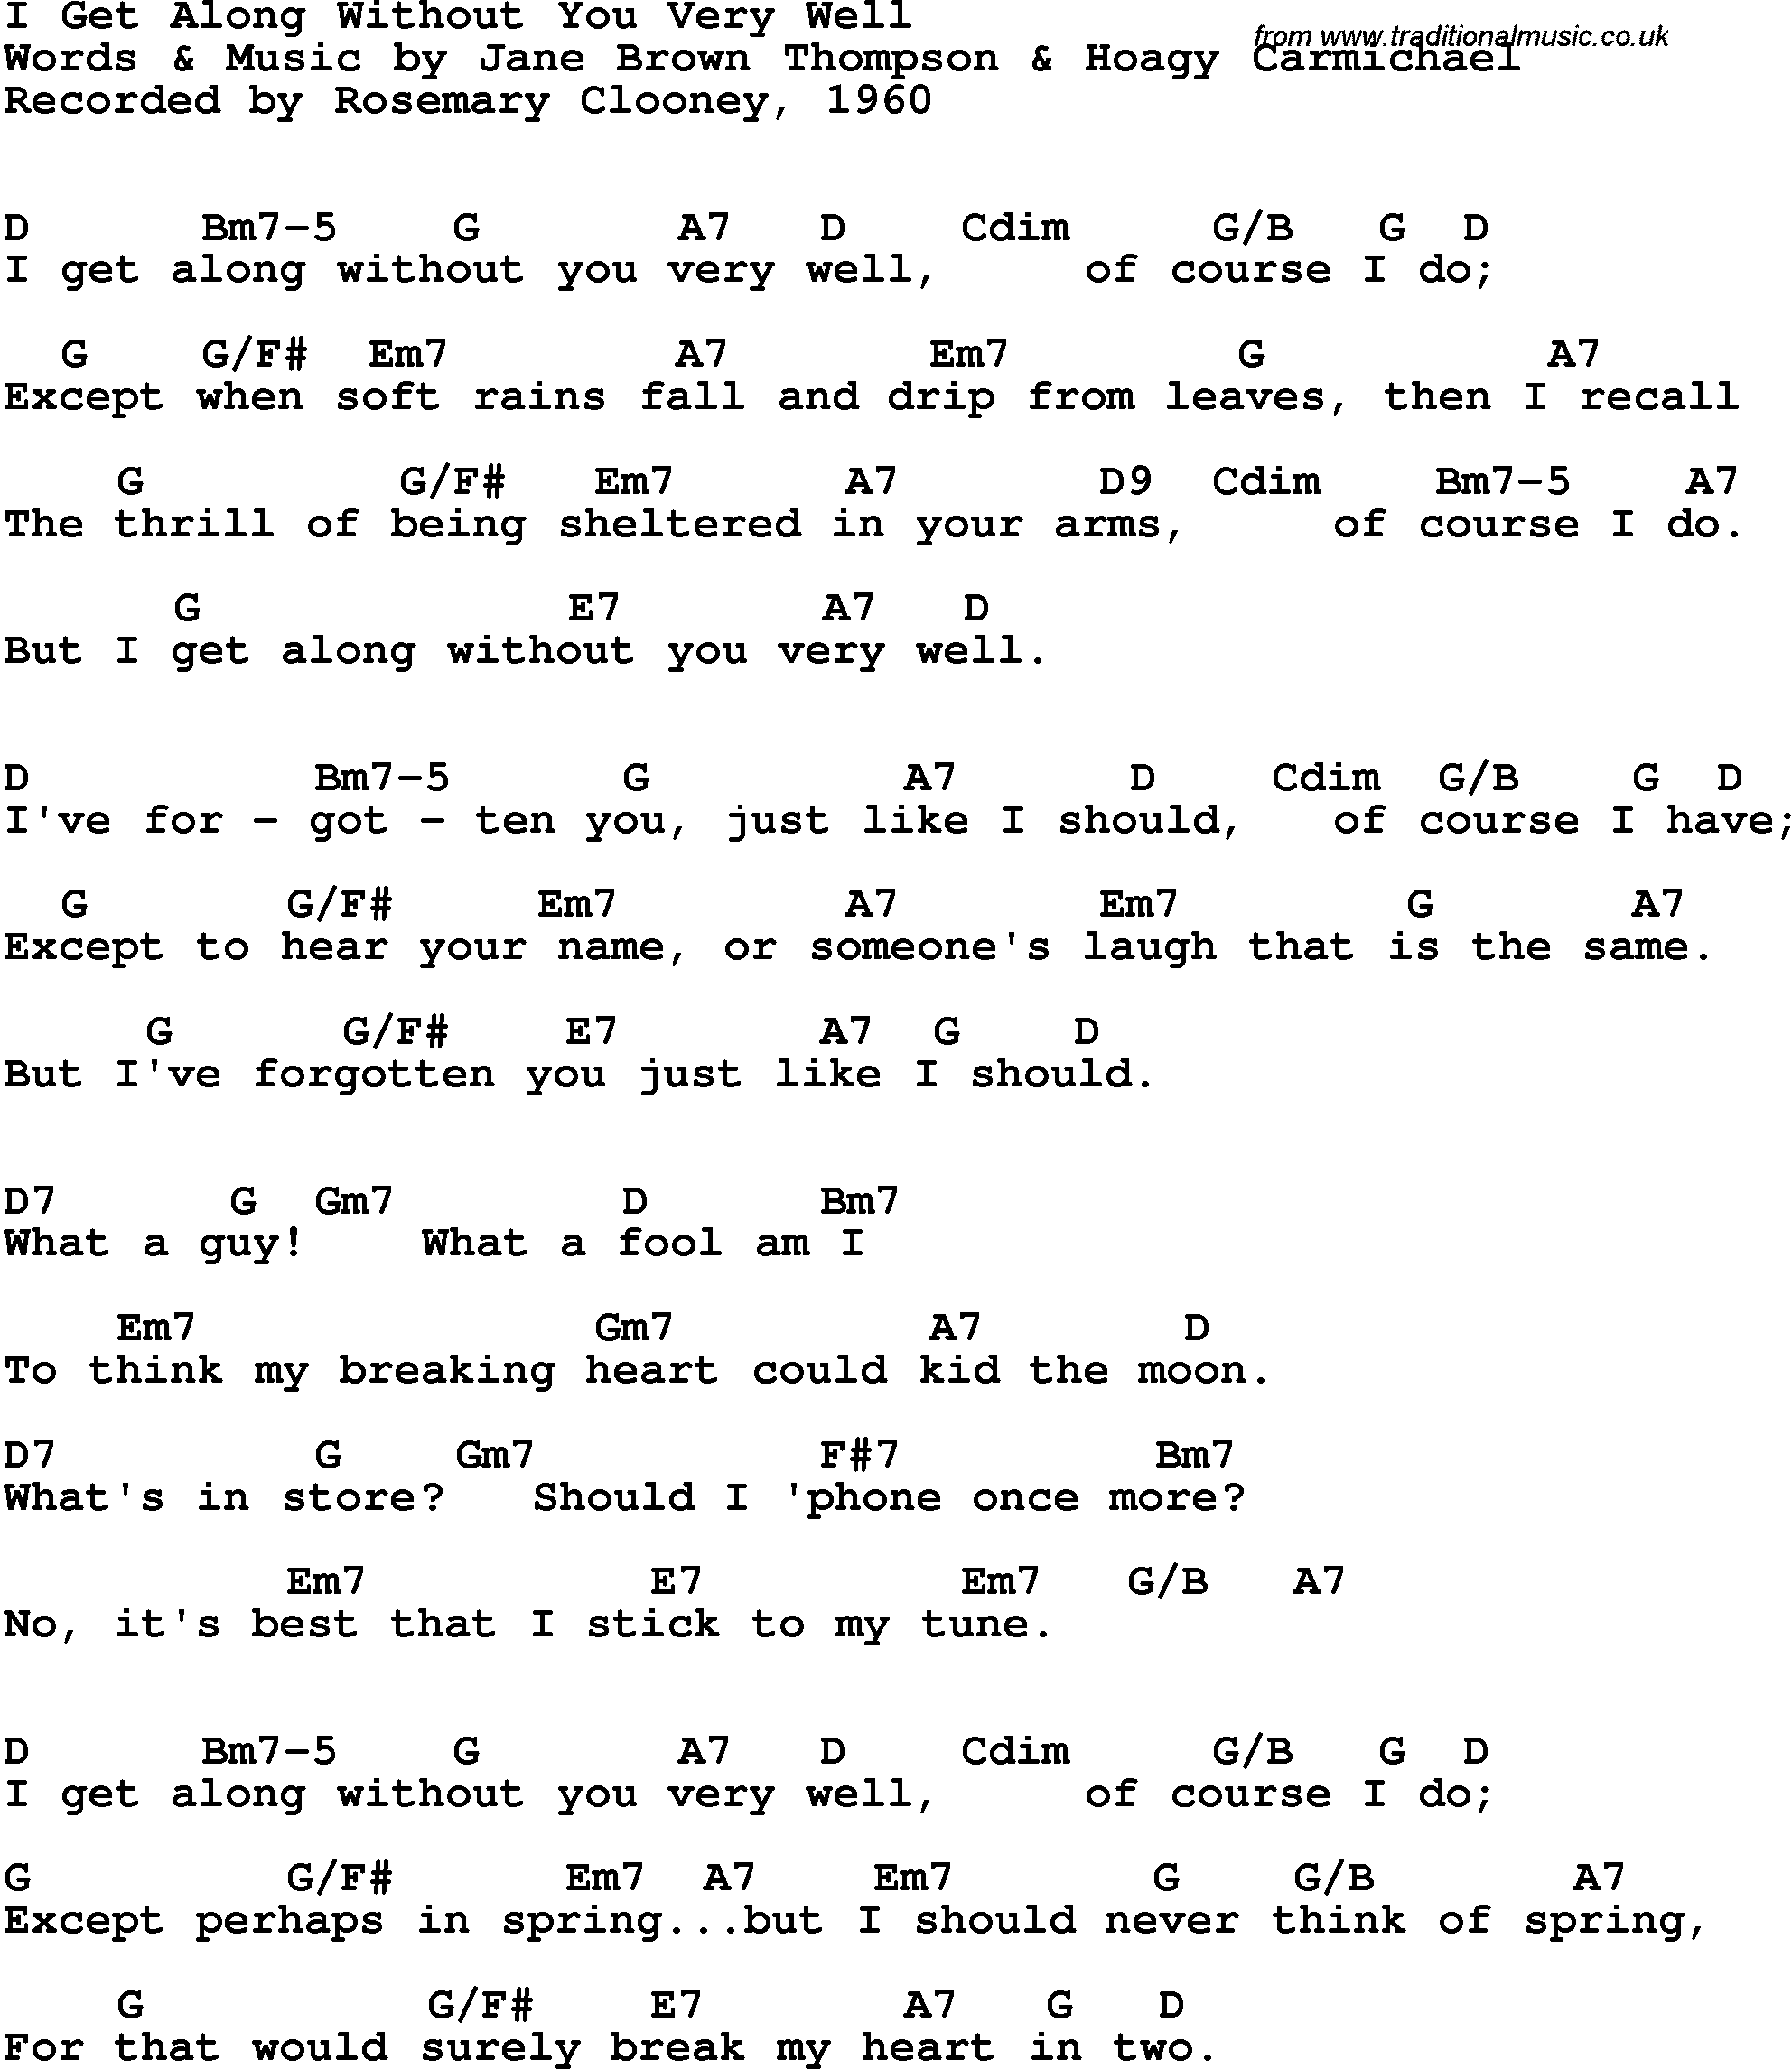 Song Lyrics with guitar chords for I Get Along Without You Very Well - Rosemary Clooney, 1960